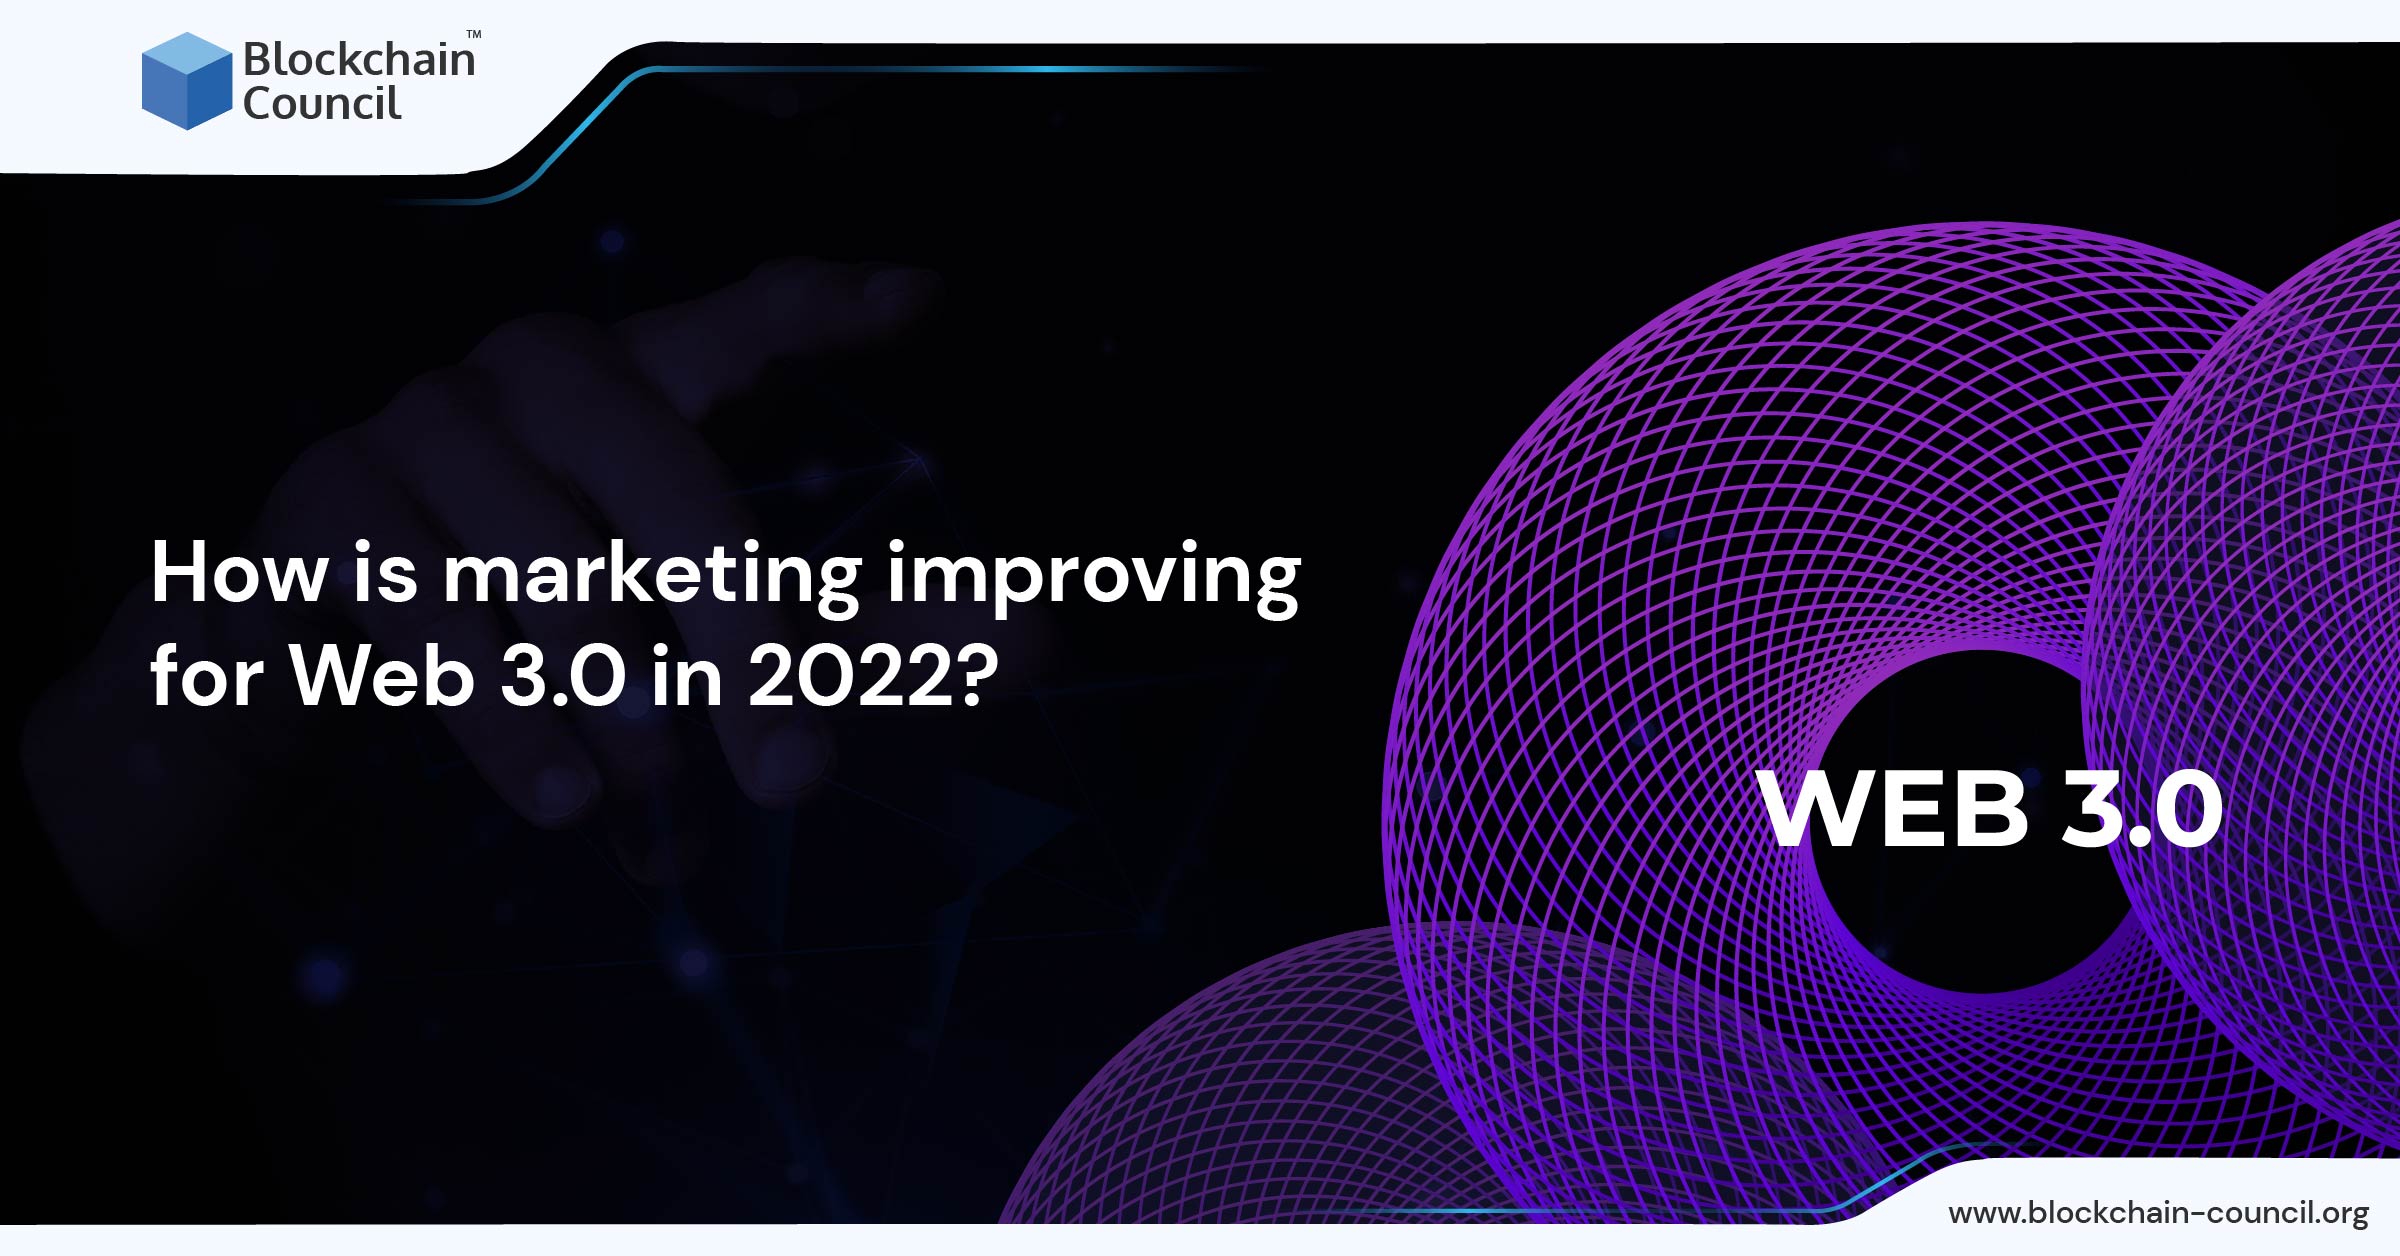 How is marketing improving for Web 3.0 in 2022